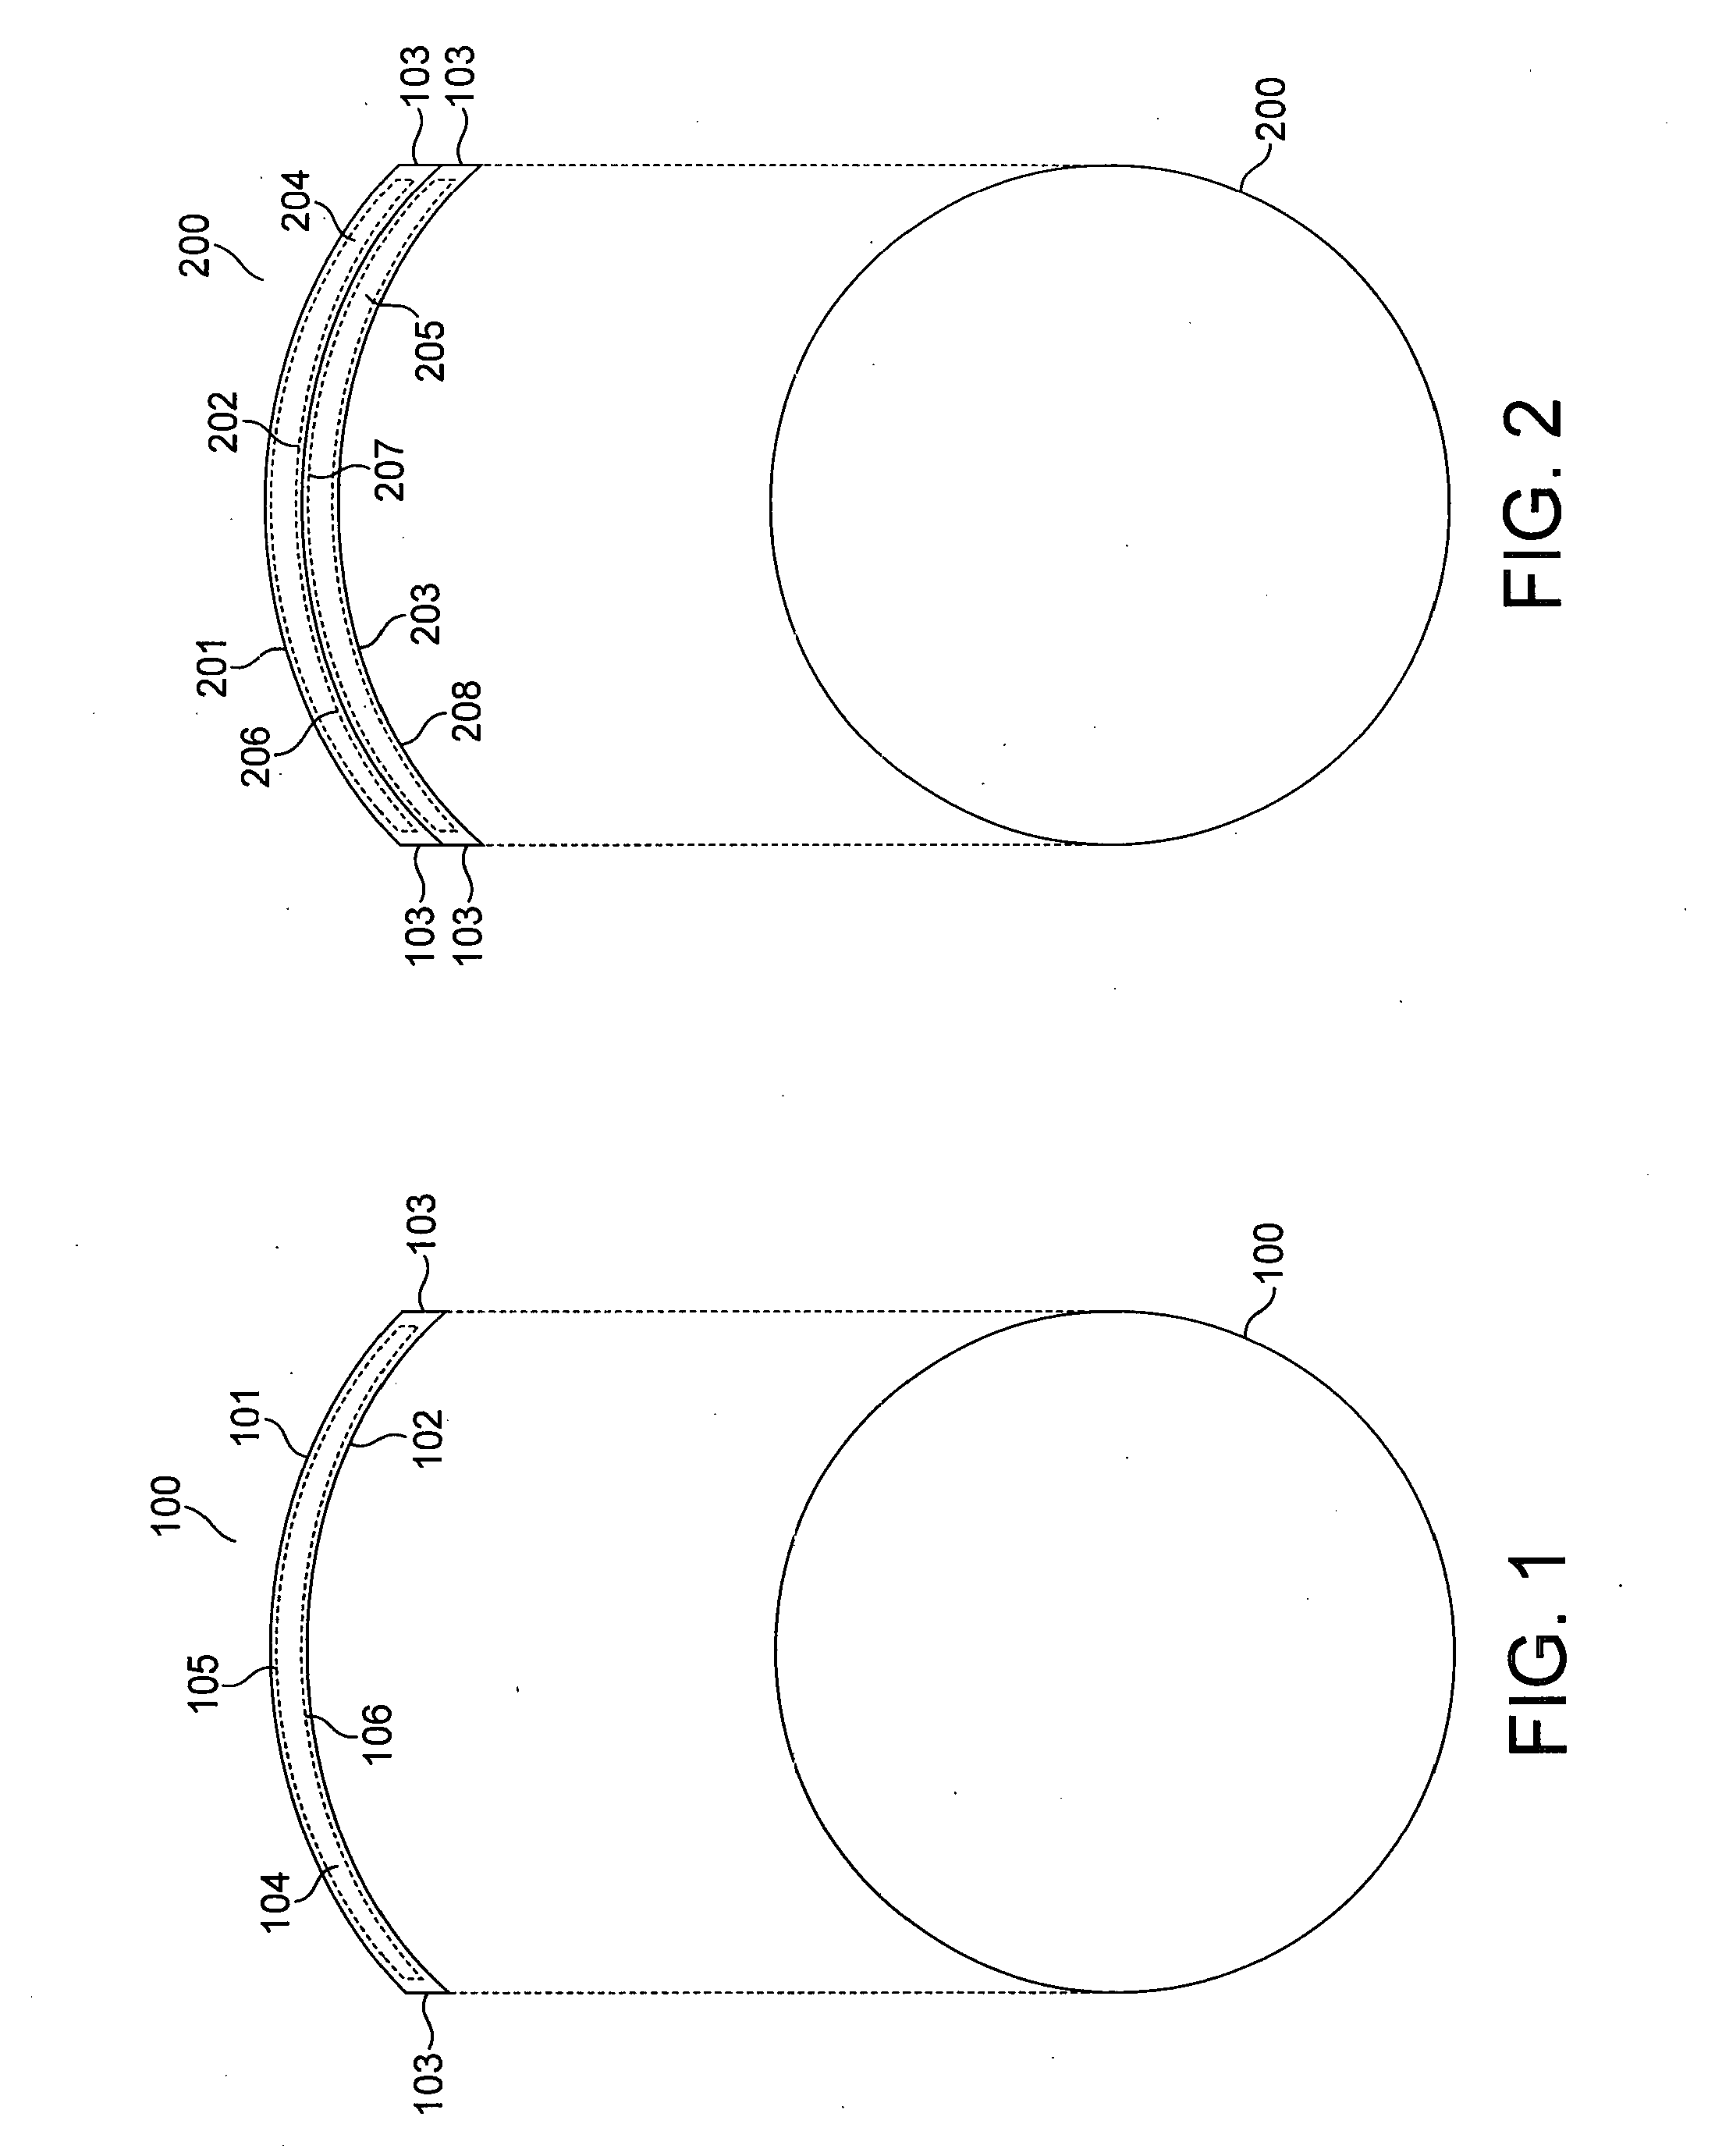 Liquid crystal device and method of manufacture